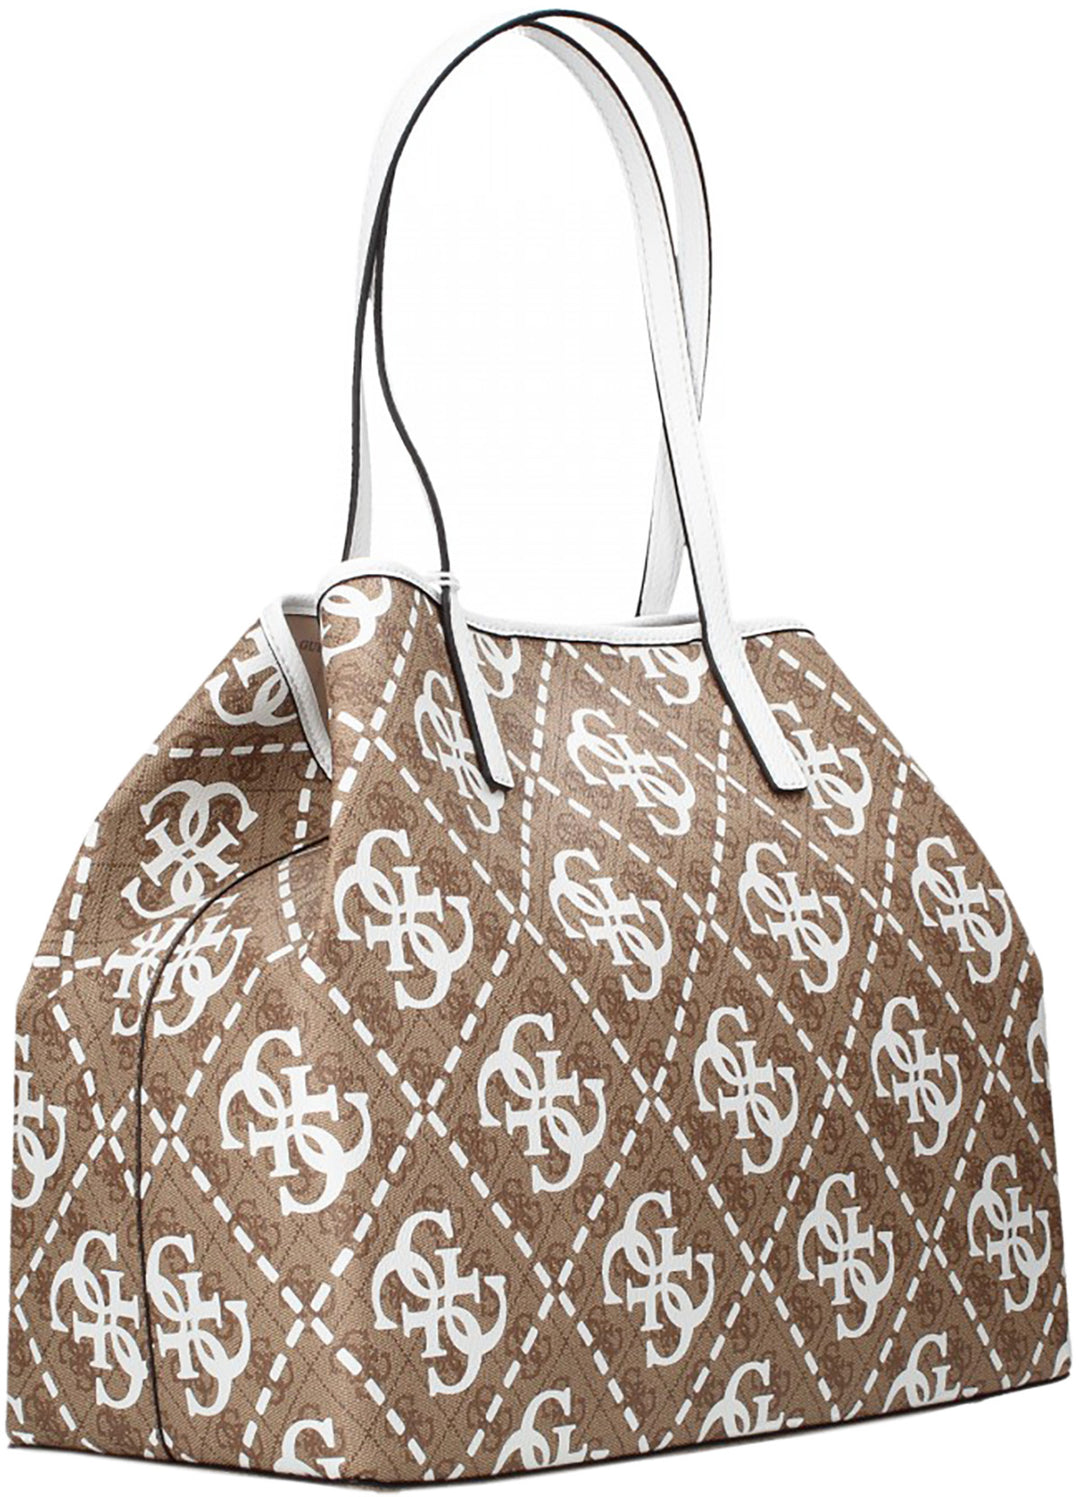 Guess Vikky Large Tote Bag In Lattee For Women